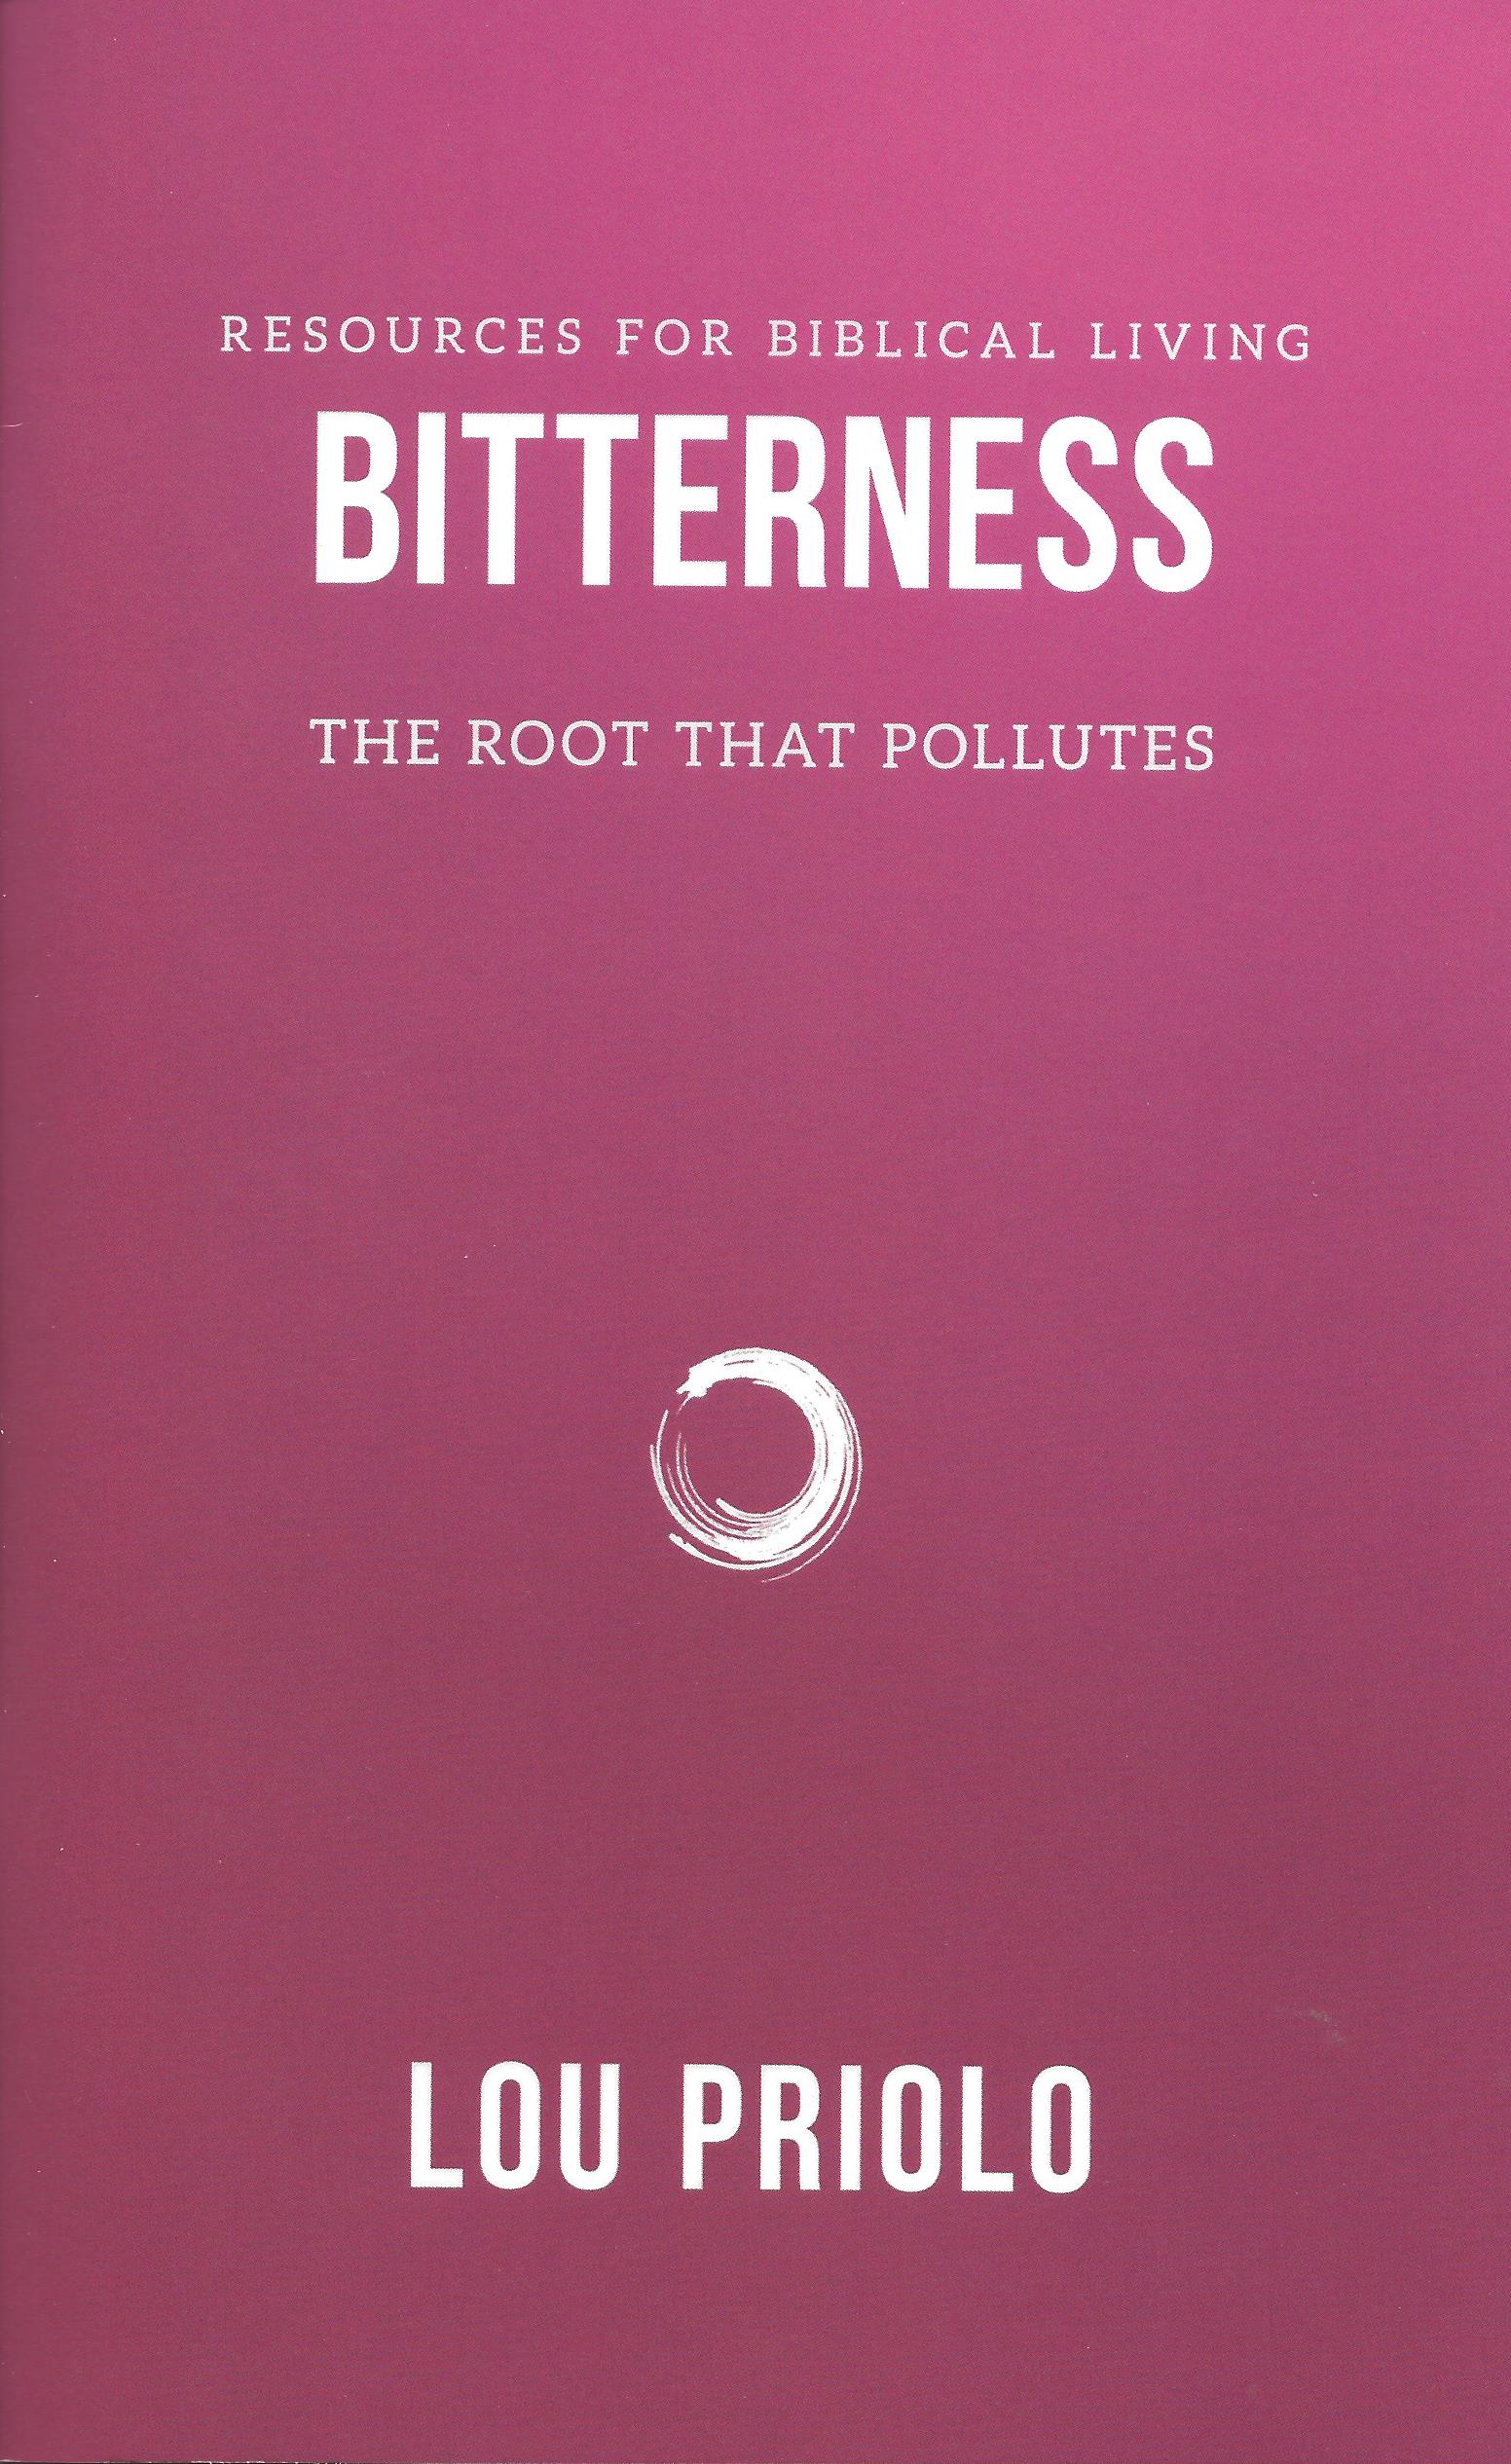 BITTERNESS: THE ROOT THAT POLLUTES Lou Priolo